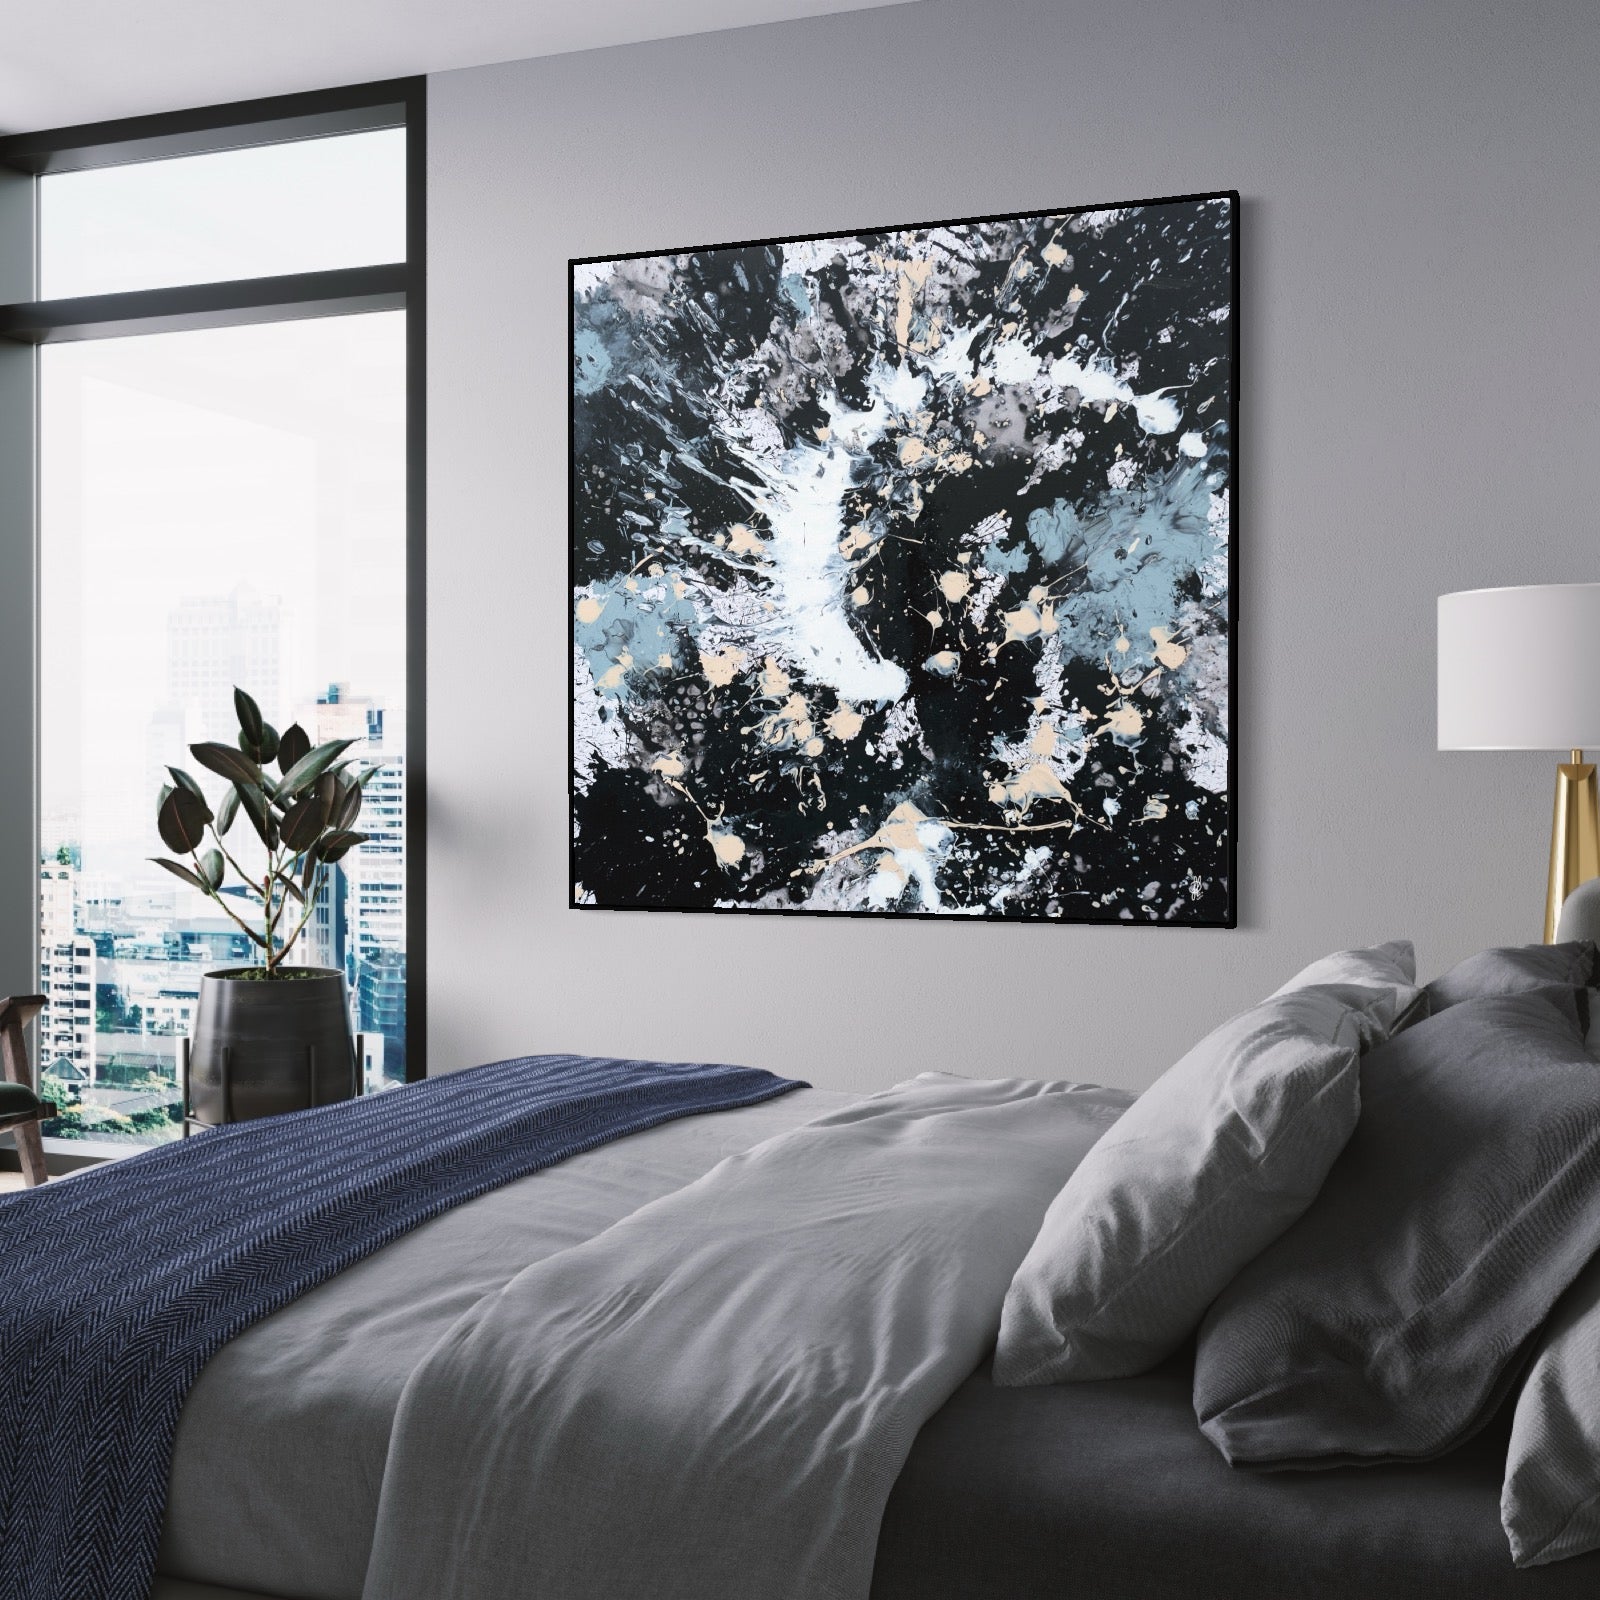 Canvas print: "Chaos In My Mind #7"